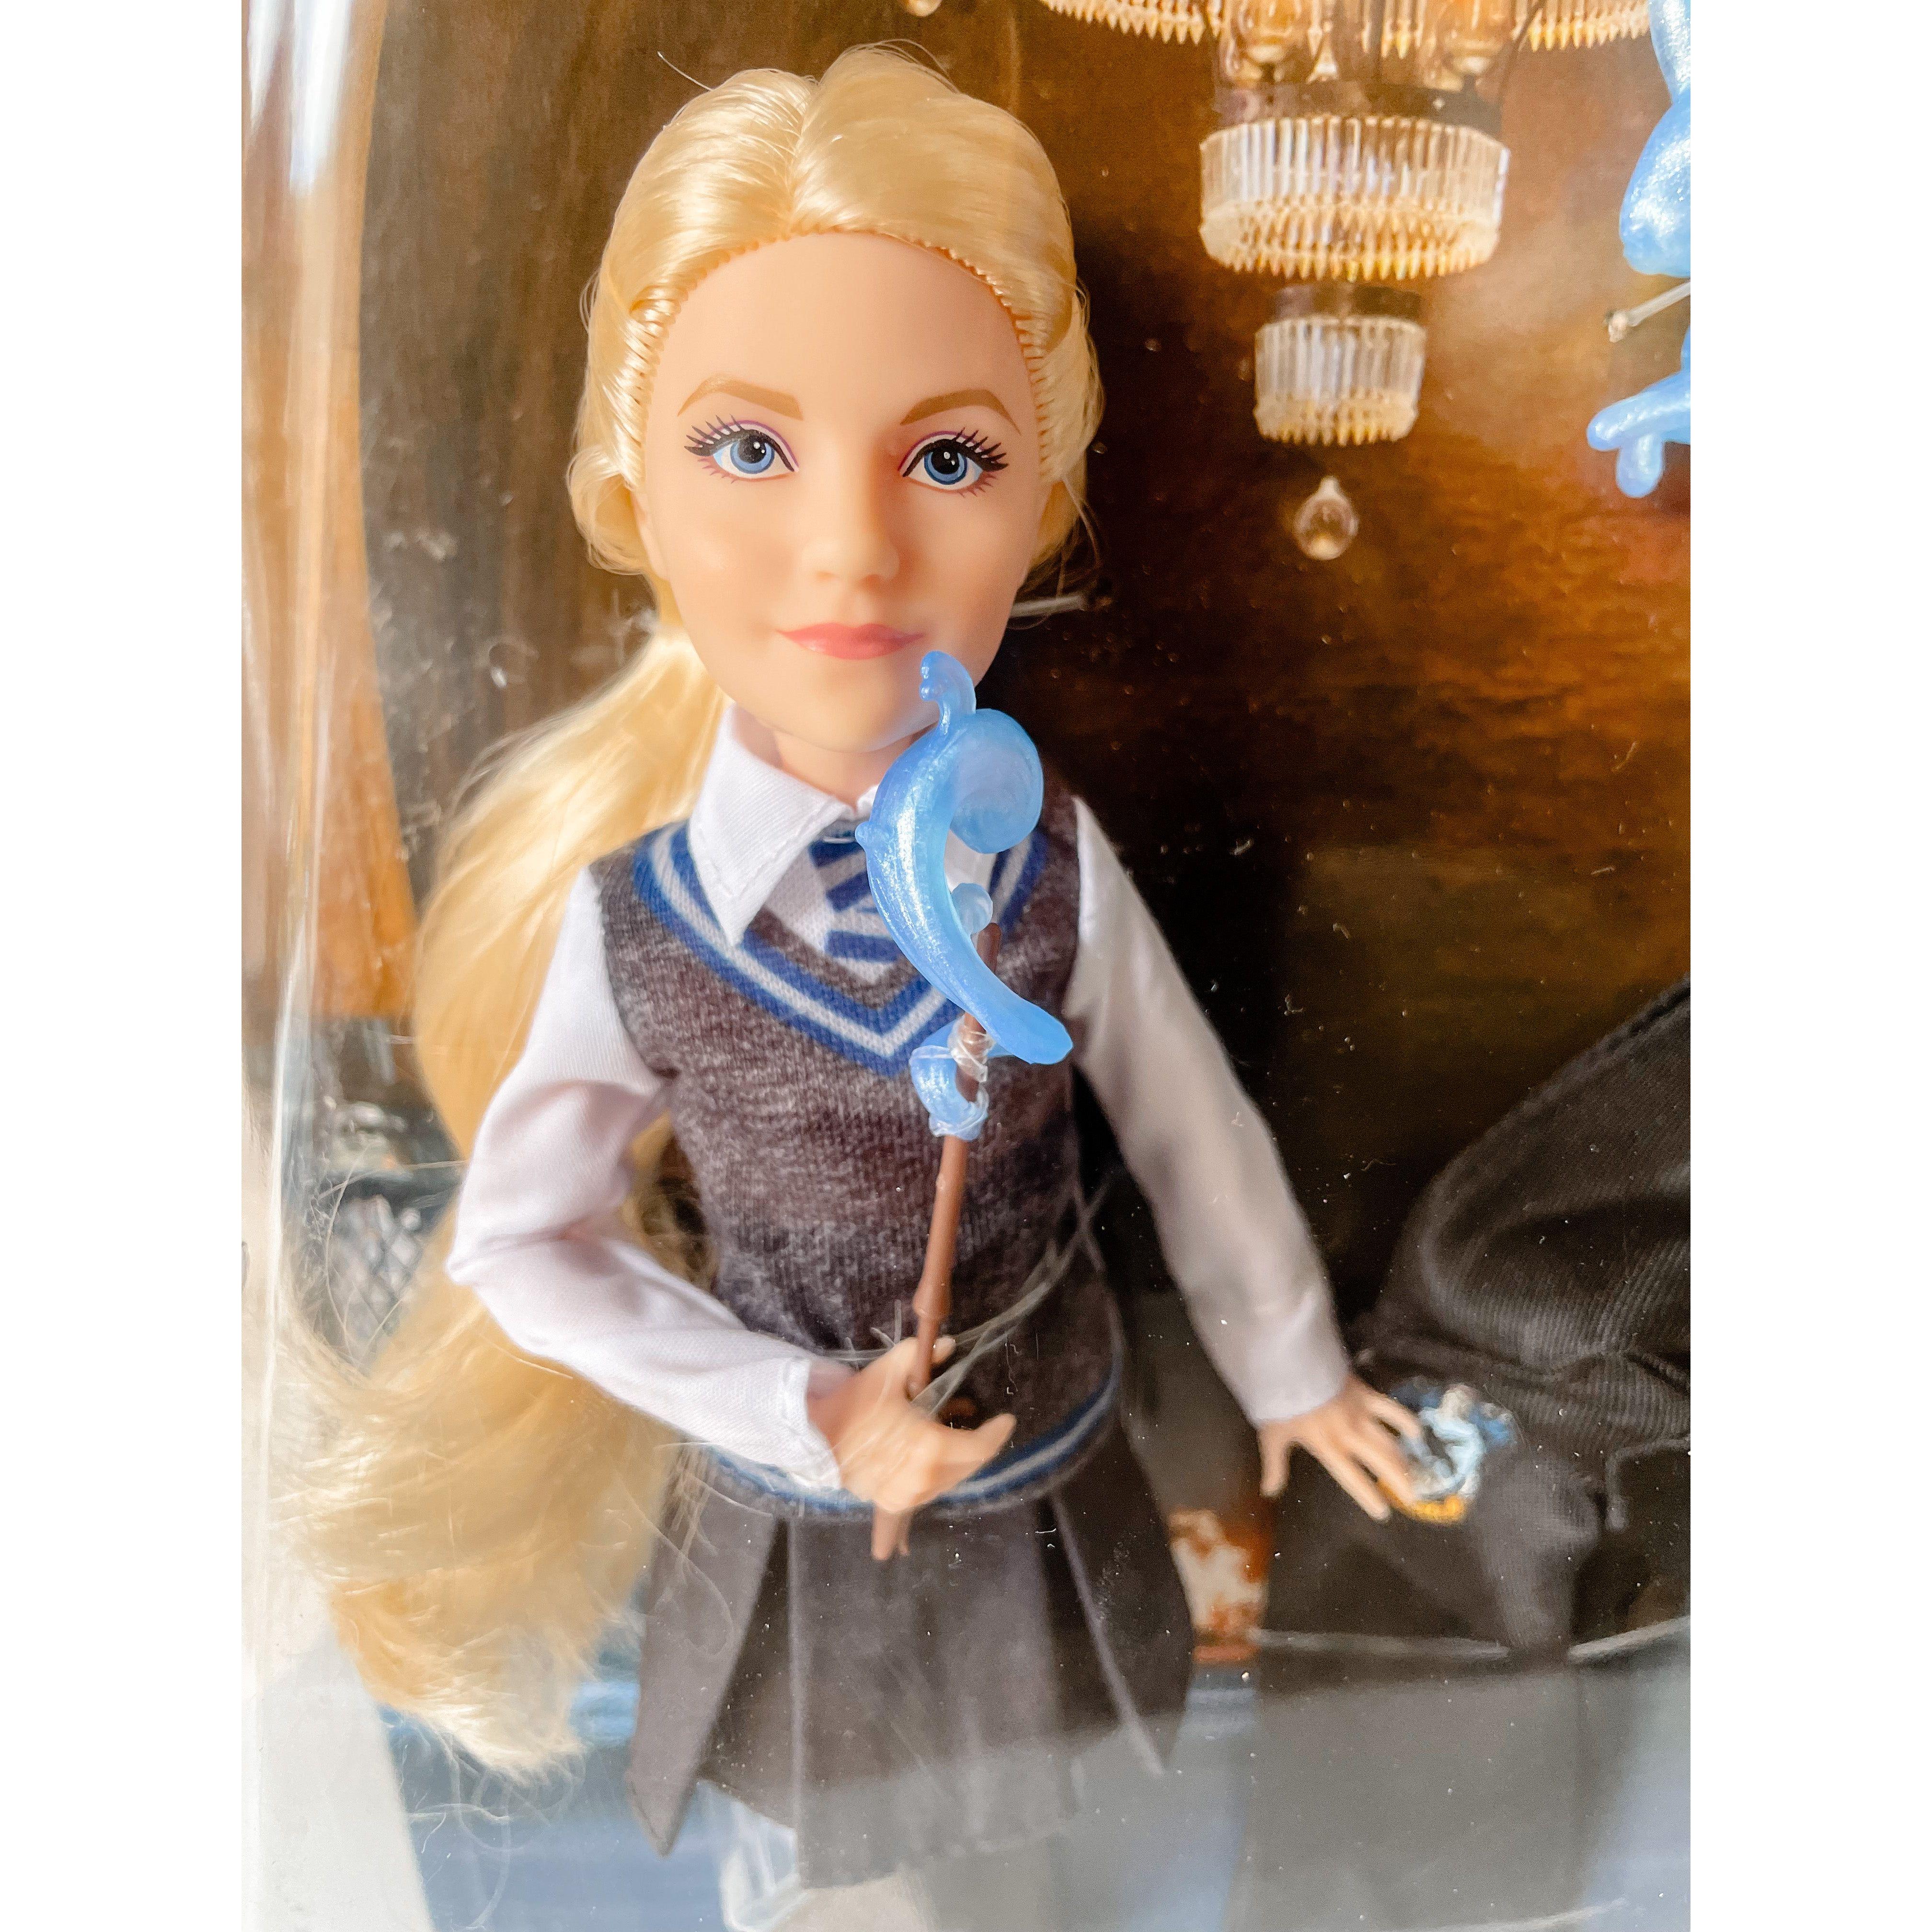 New Harry Potter dolls from Mattel: Draco Malfoy and Luna Lovegood in  school outfits 